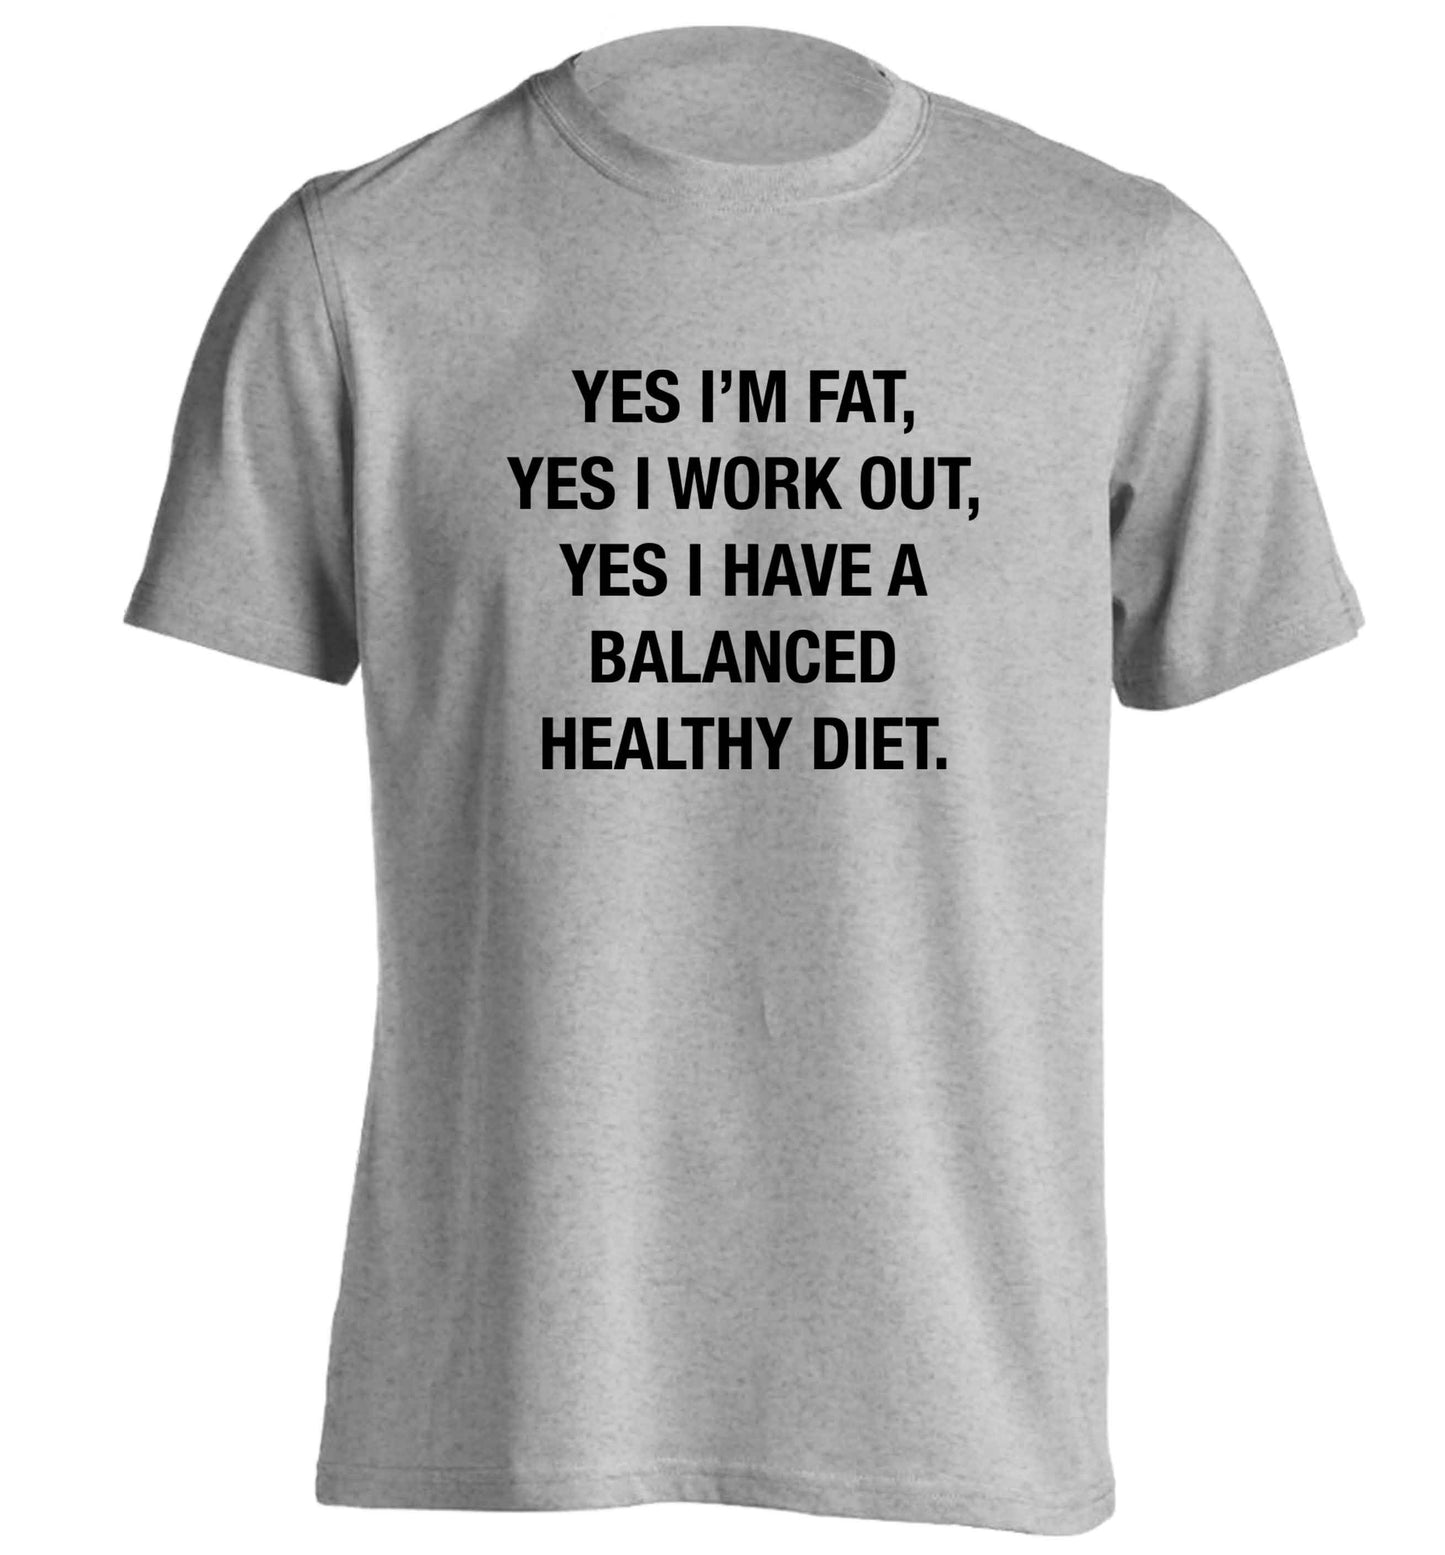 Yes I'm fat, yes I work out, yes I have a balanced healthy diet adults unisex grey Tshirt 2XL